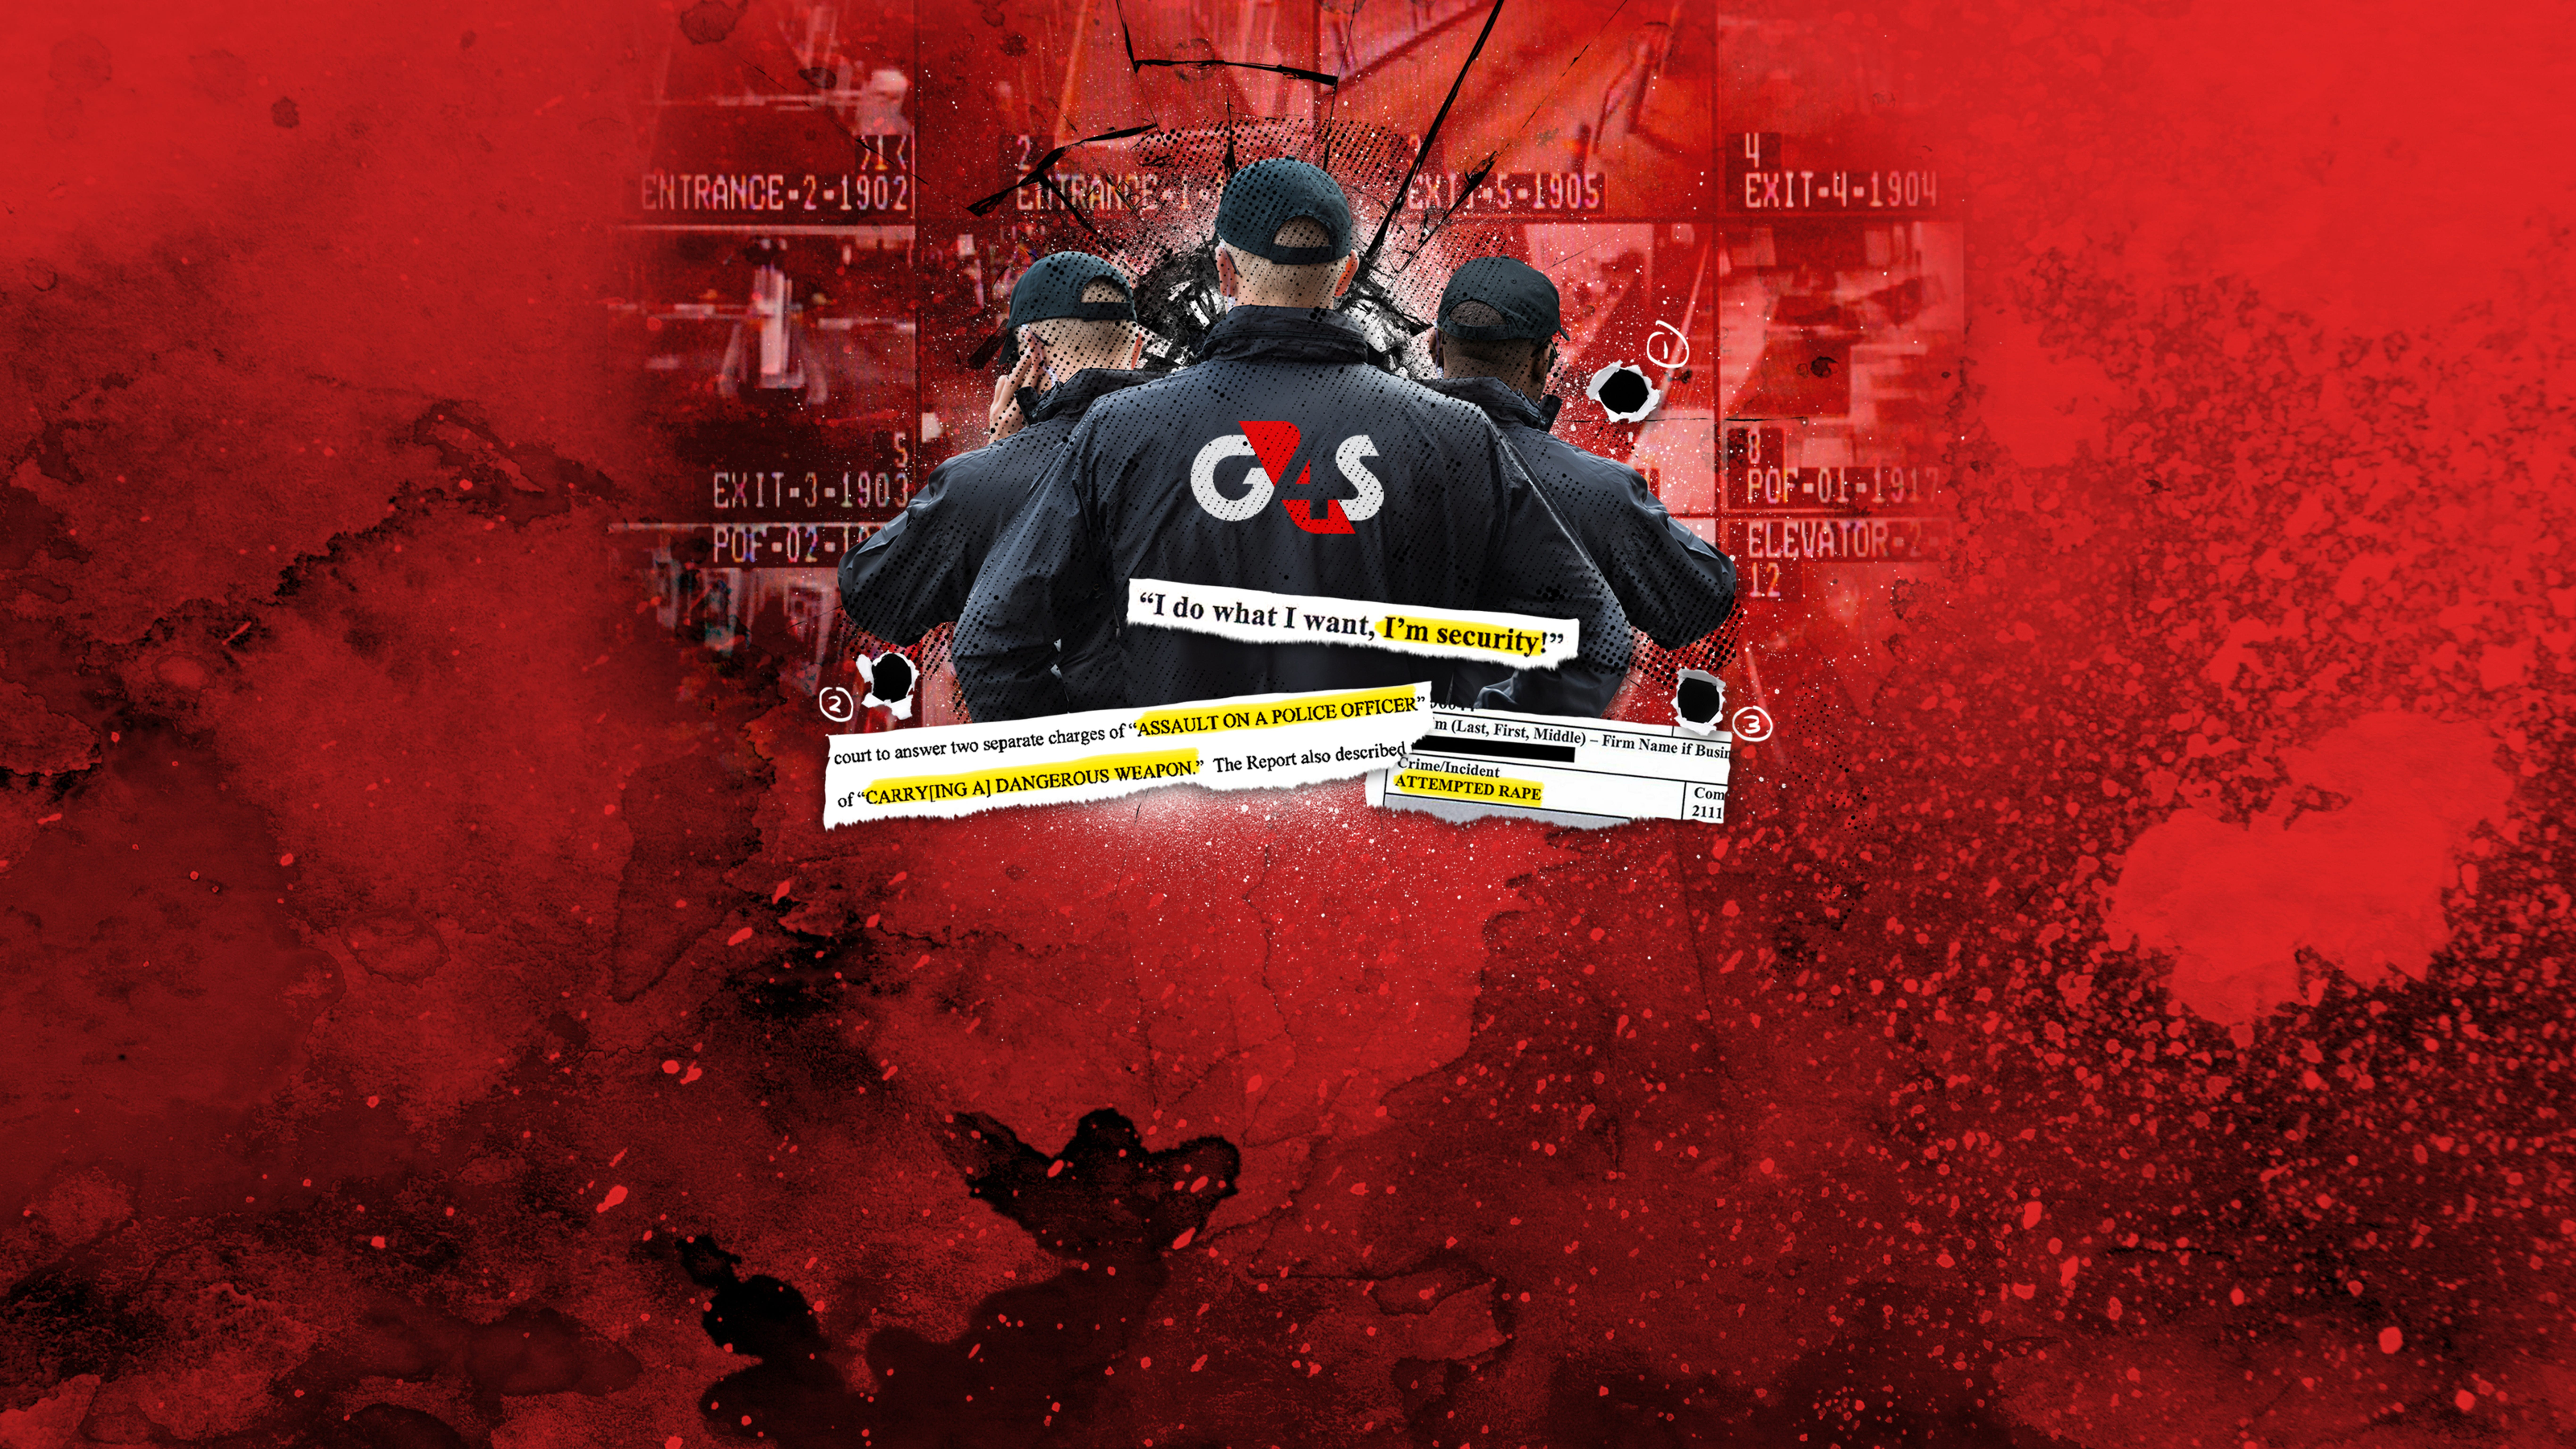 G4s Spread Security Guards And Guns Around World Then Came Violence